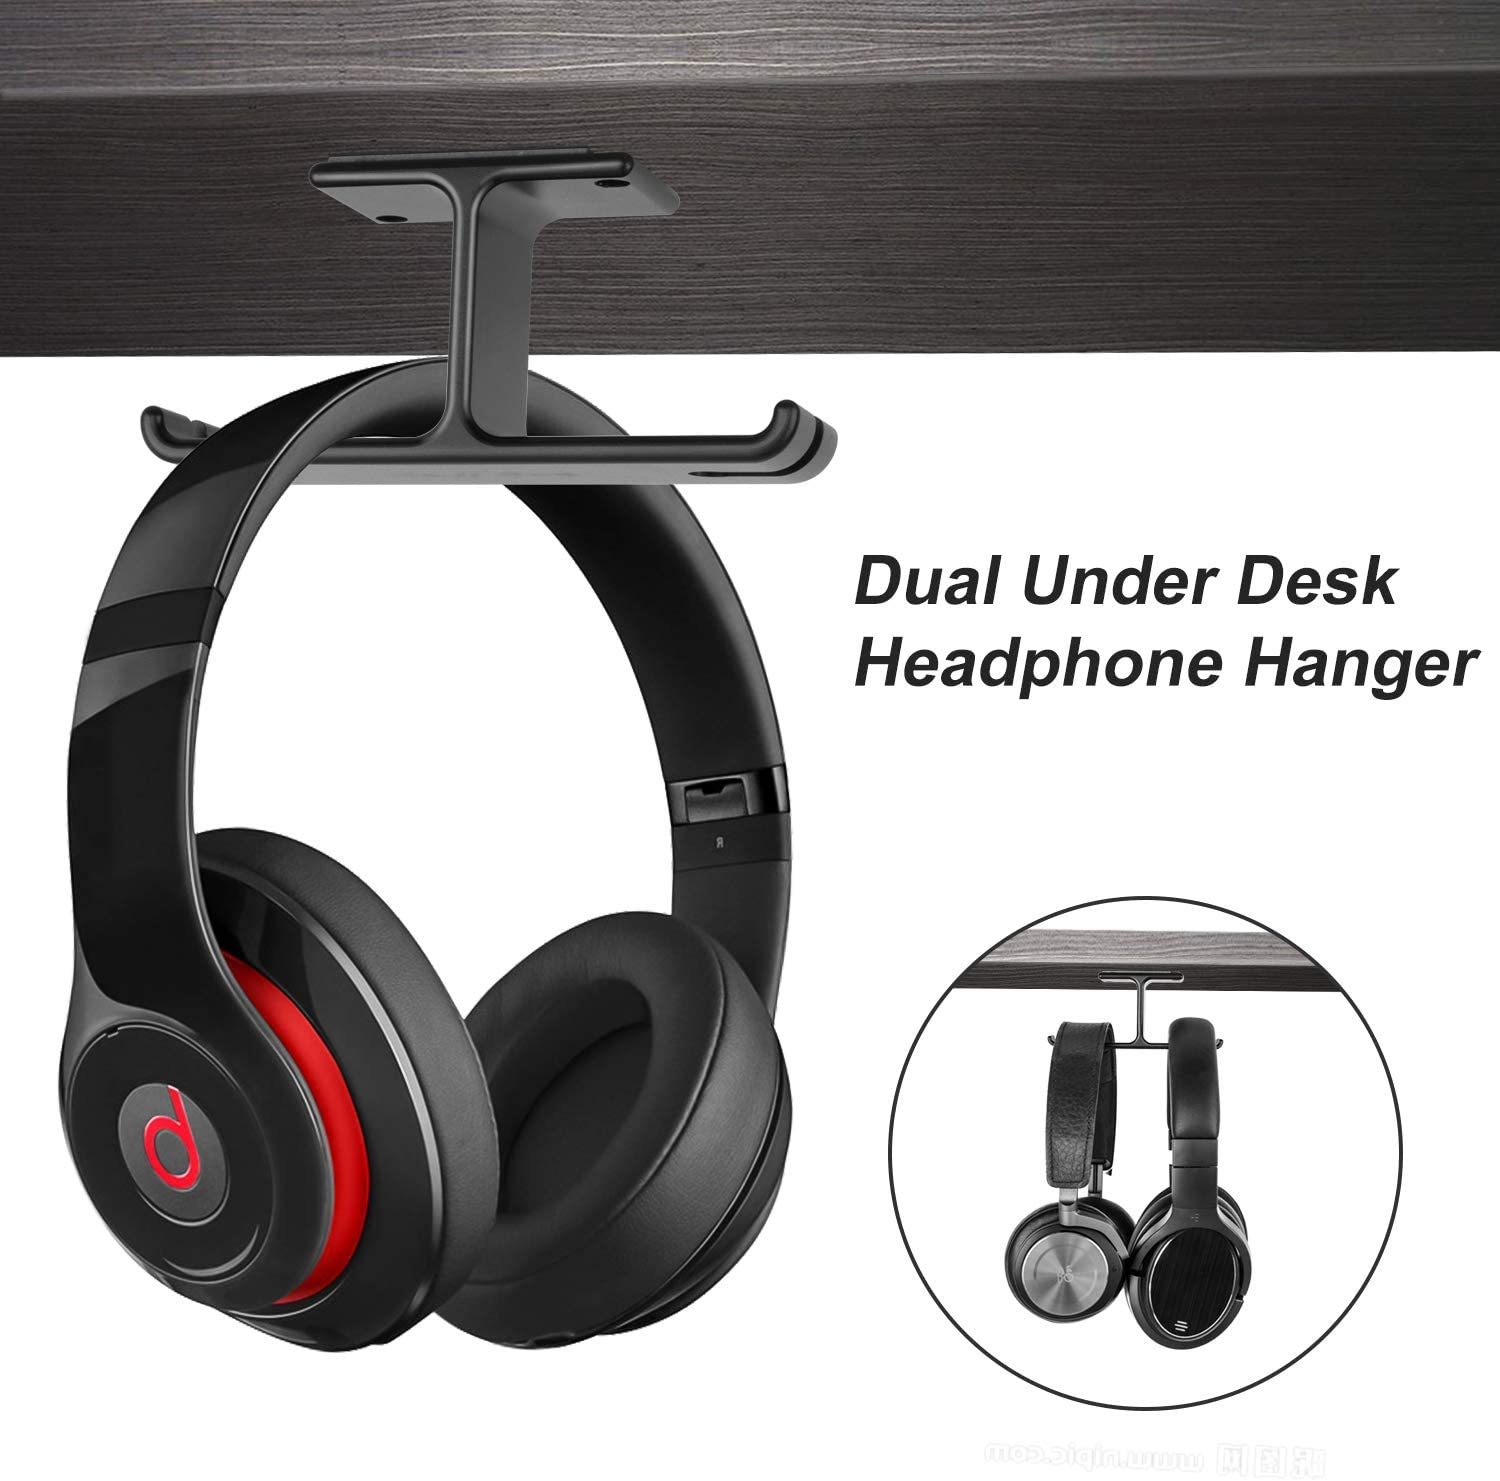 Dual Headphone Hanger Headset Stand New Bee Under Desk Aluminum Headphone Hook Mount with Cable Organizer for All Headphones